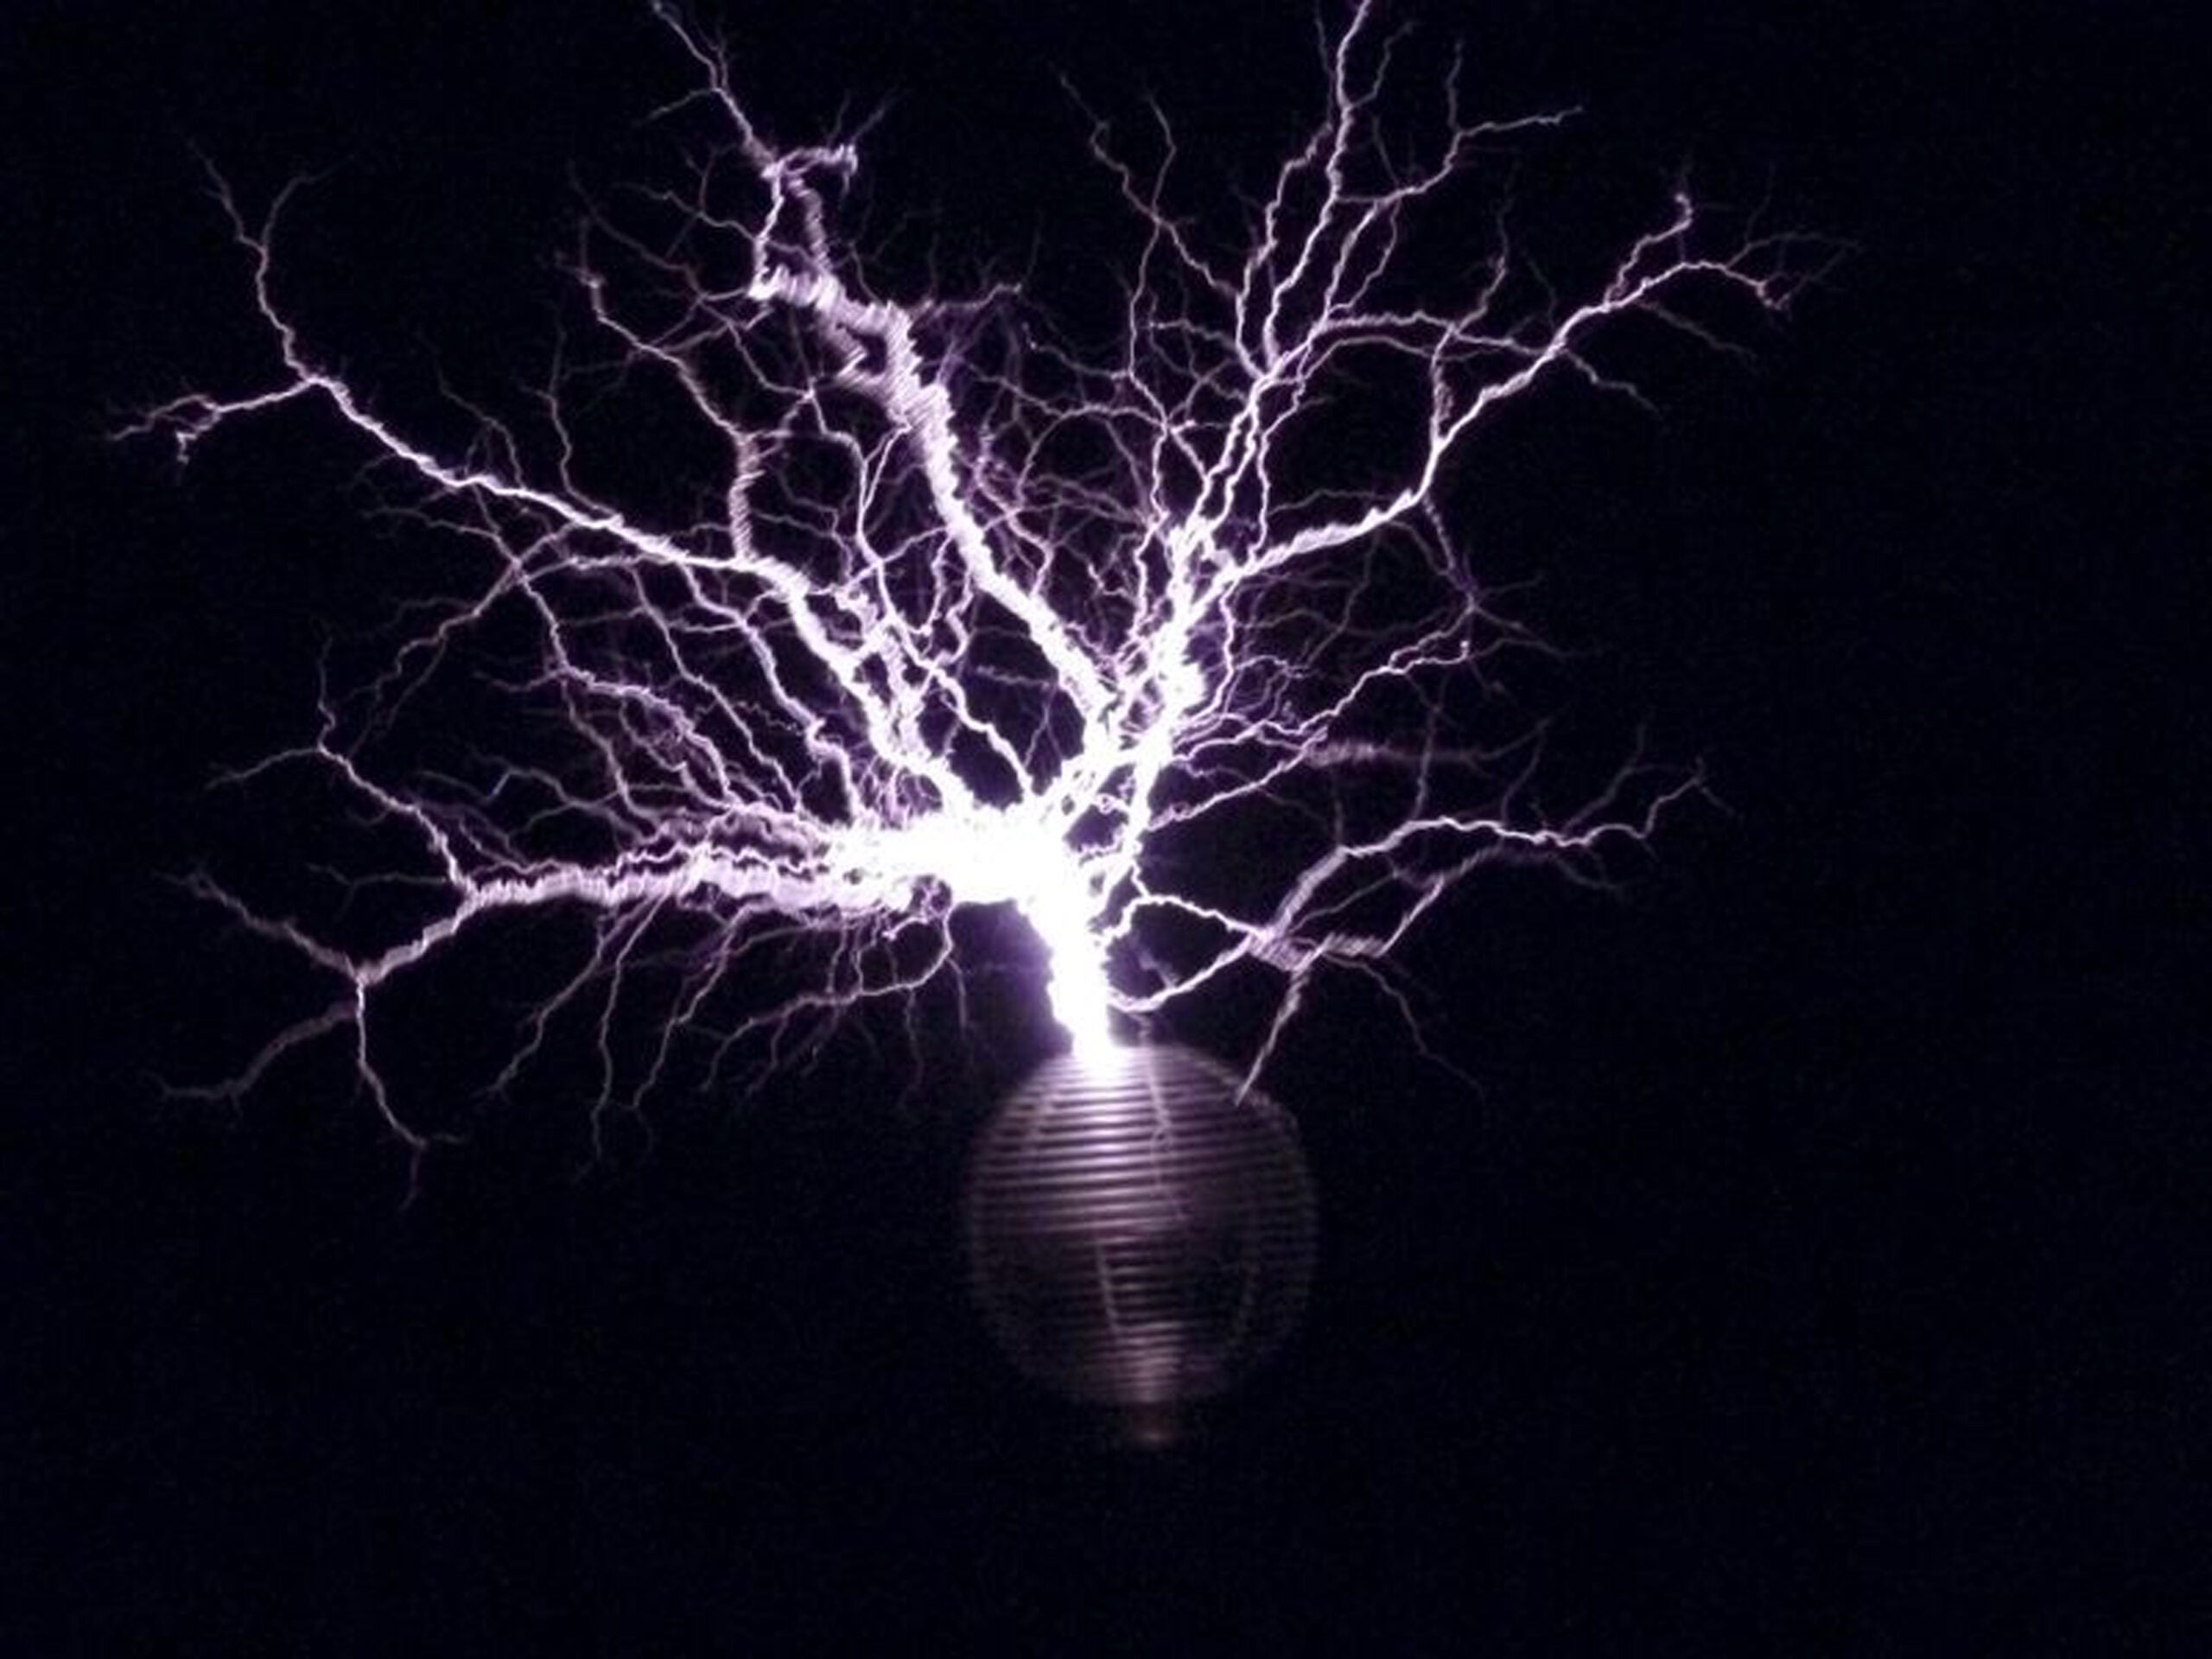 Electrifying! Tesla coil film brings powerful 'Lighting Dreams' to